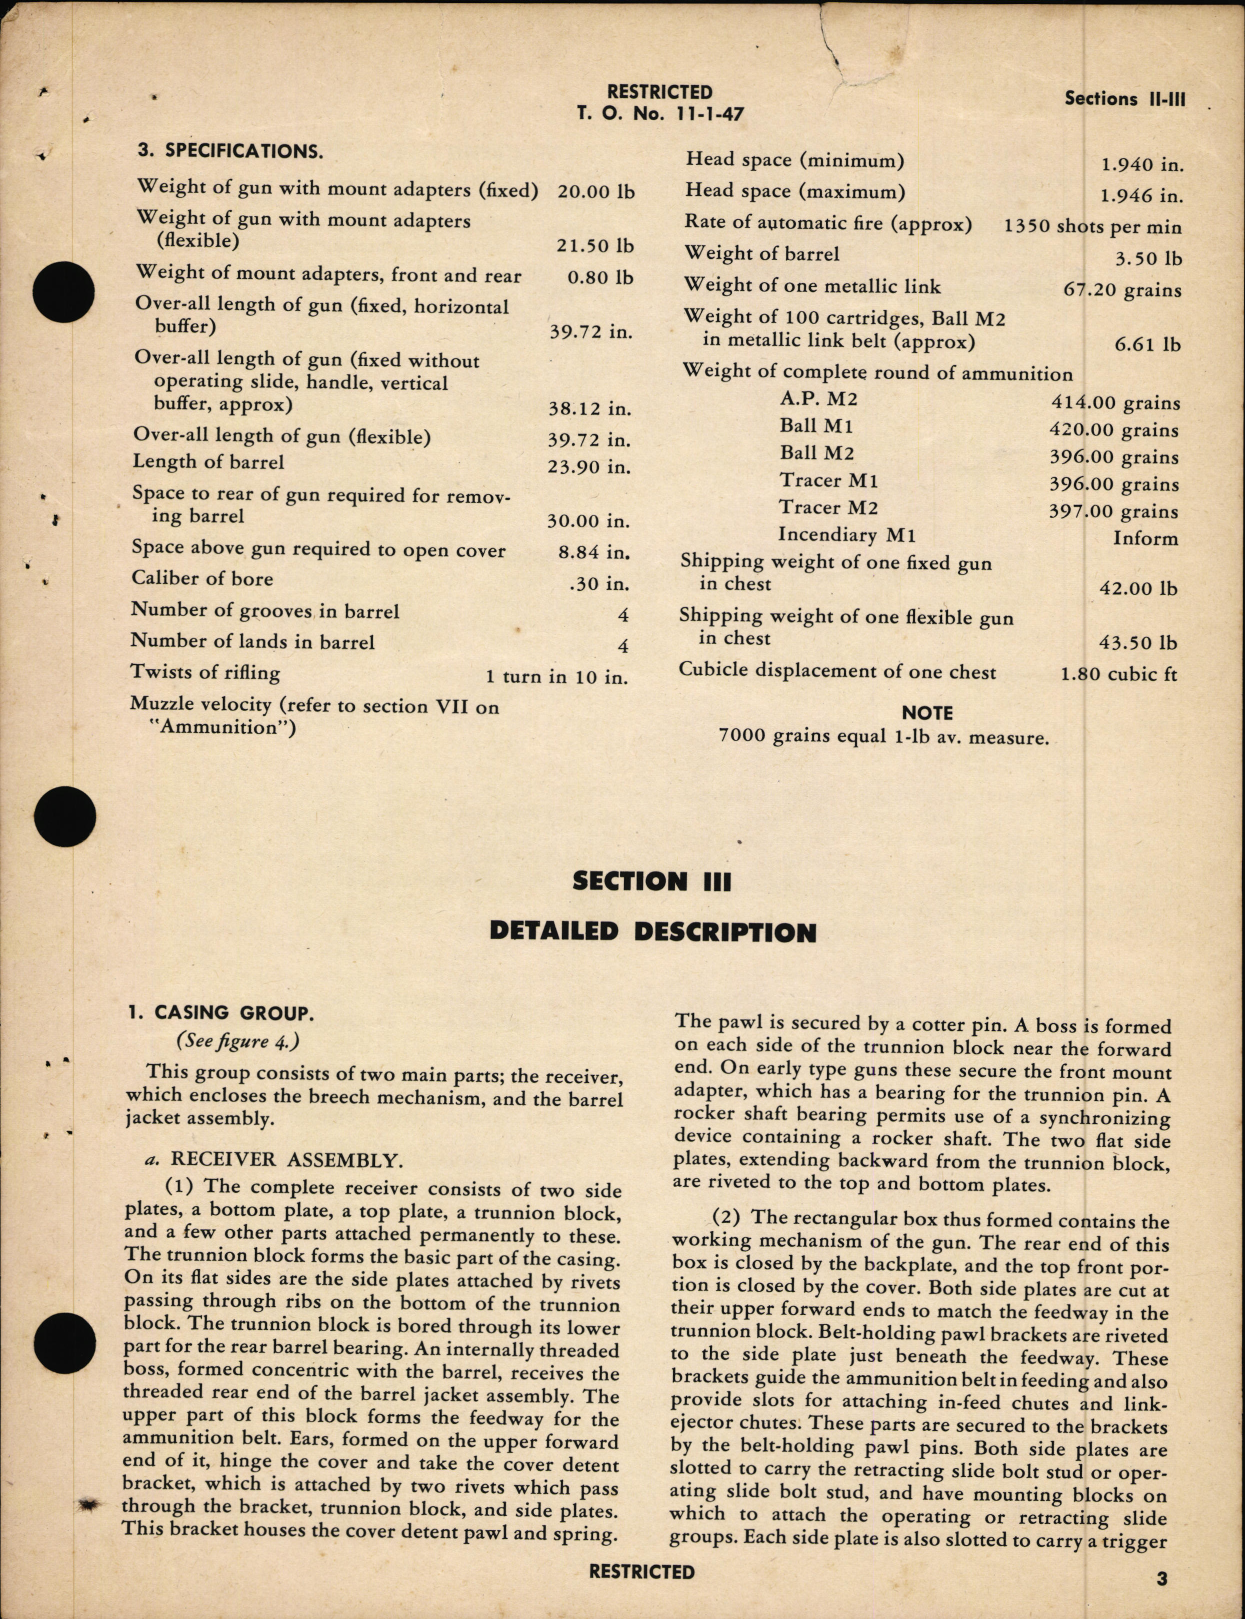 Sample page 7 from AirCorps Library document: Handbook of Instructions with Parts Catalog for .30 Caliber M2 Machine Gun, Fixed and Flexible